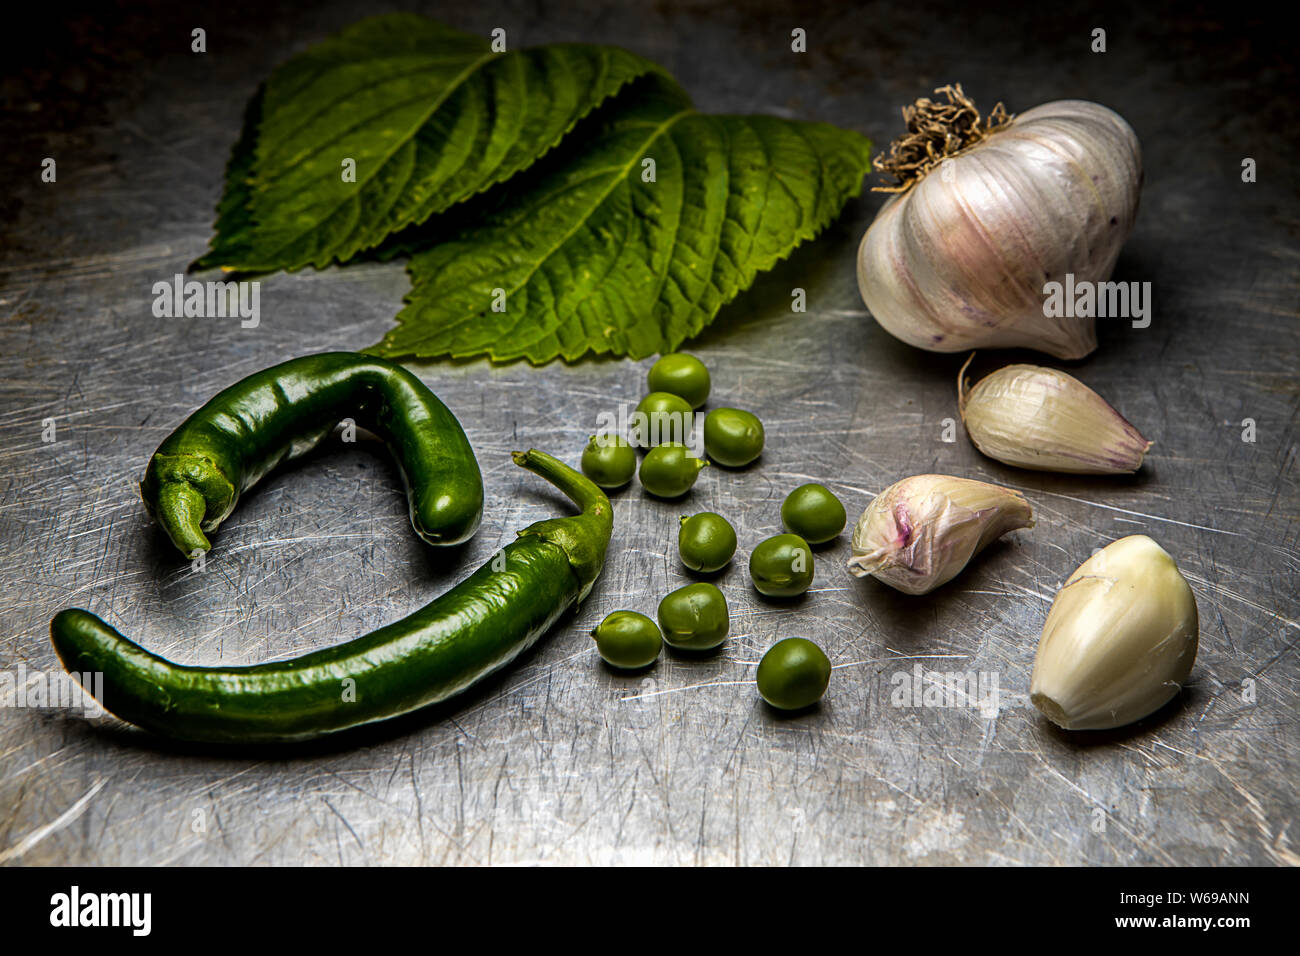 A close up studio image of an assortment of vegetables such as garlic, lettuce, peas, and peppers. Stock Photo